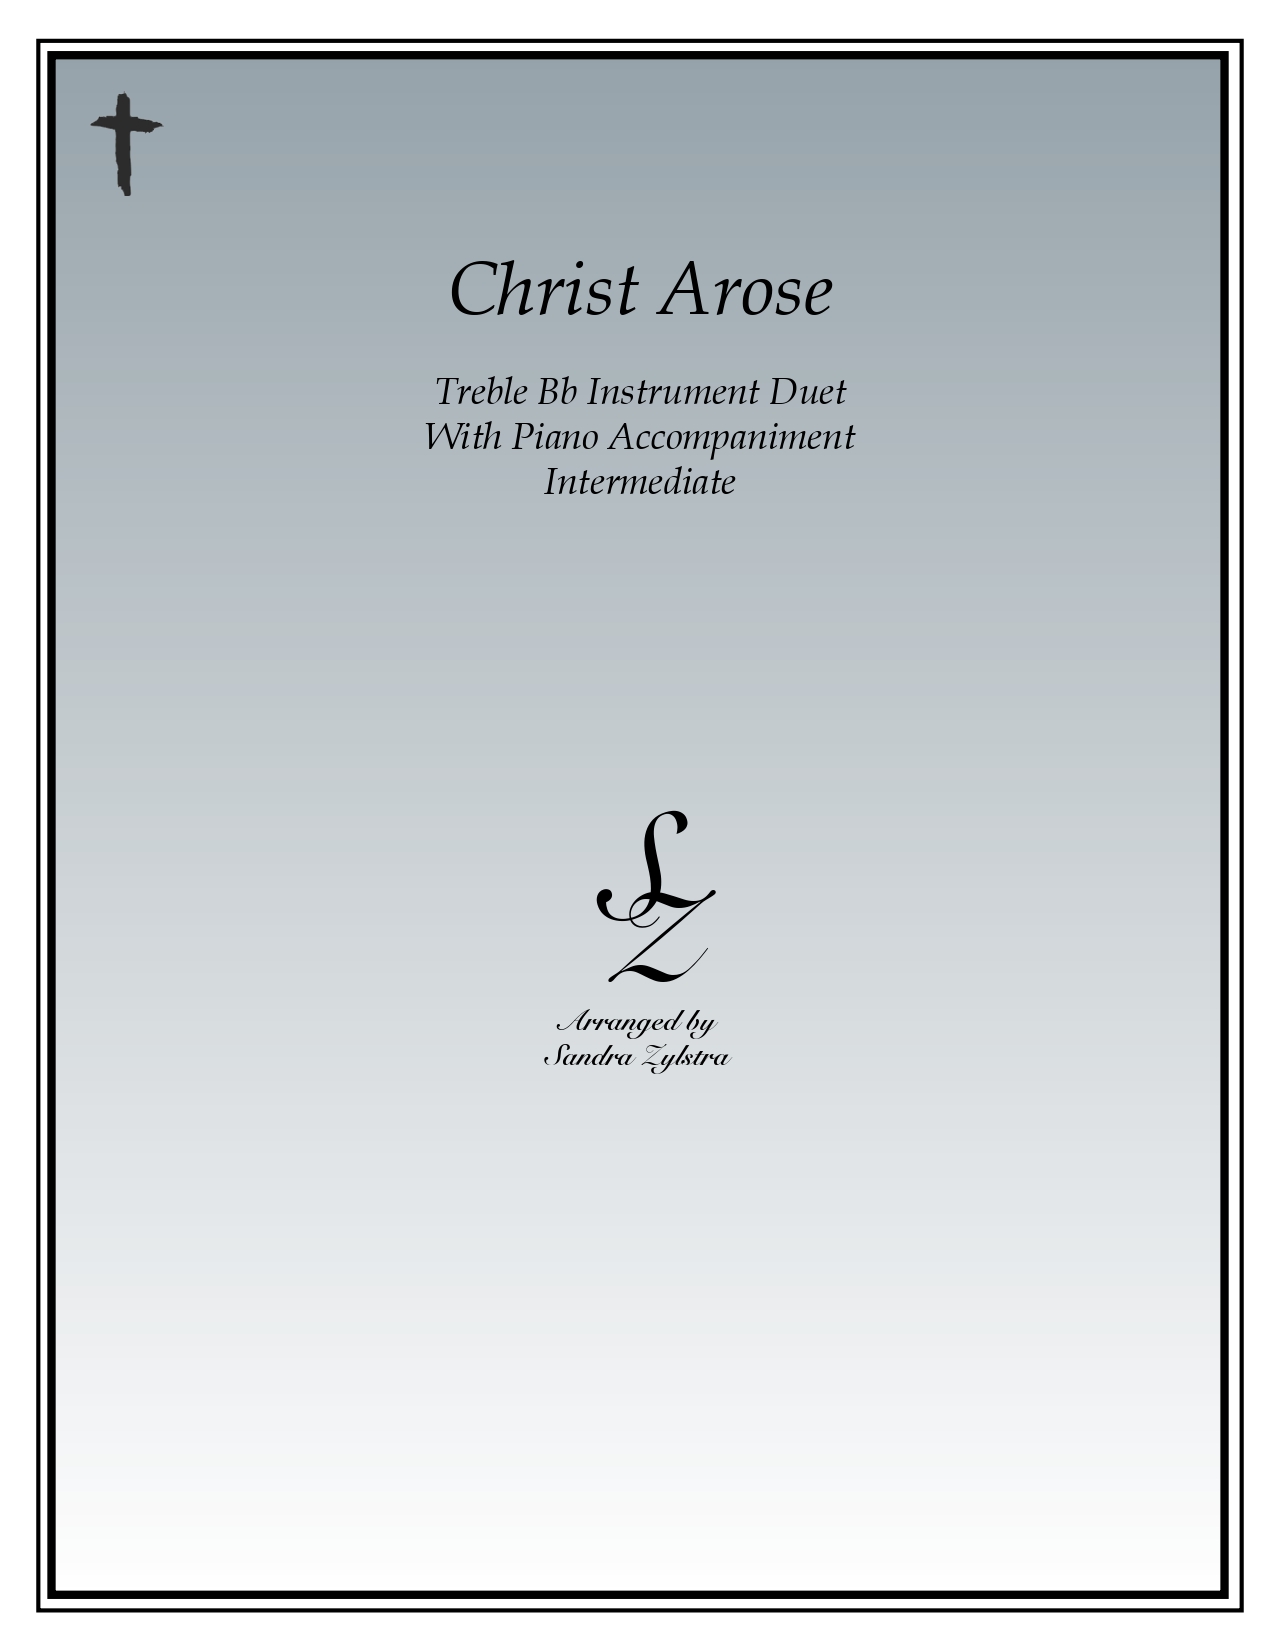 Christ Arose Bb instrument duet parts cover page 00011